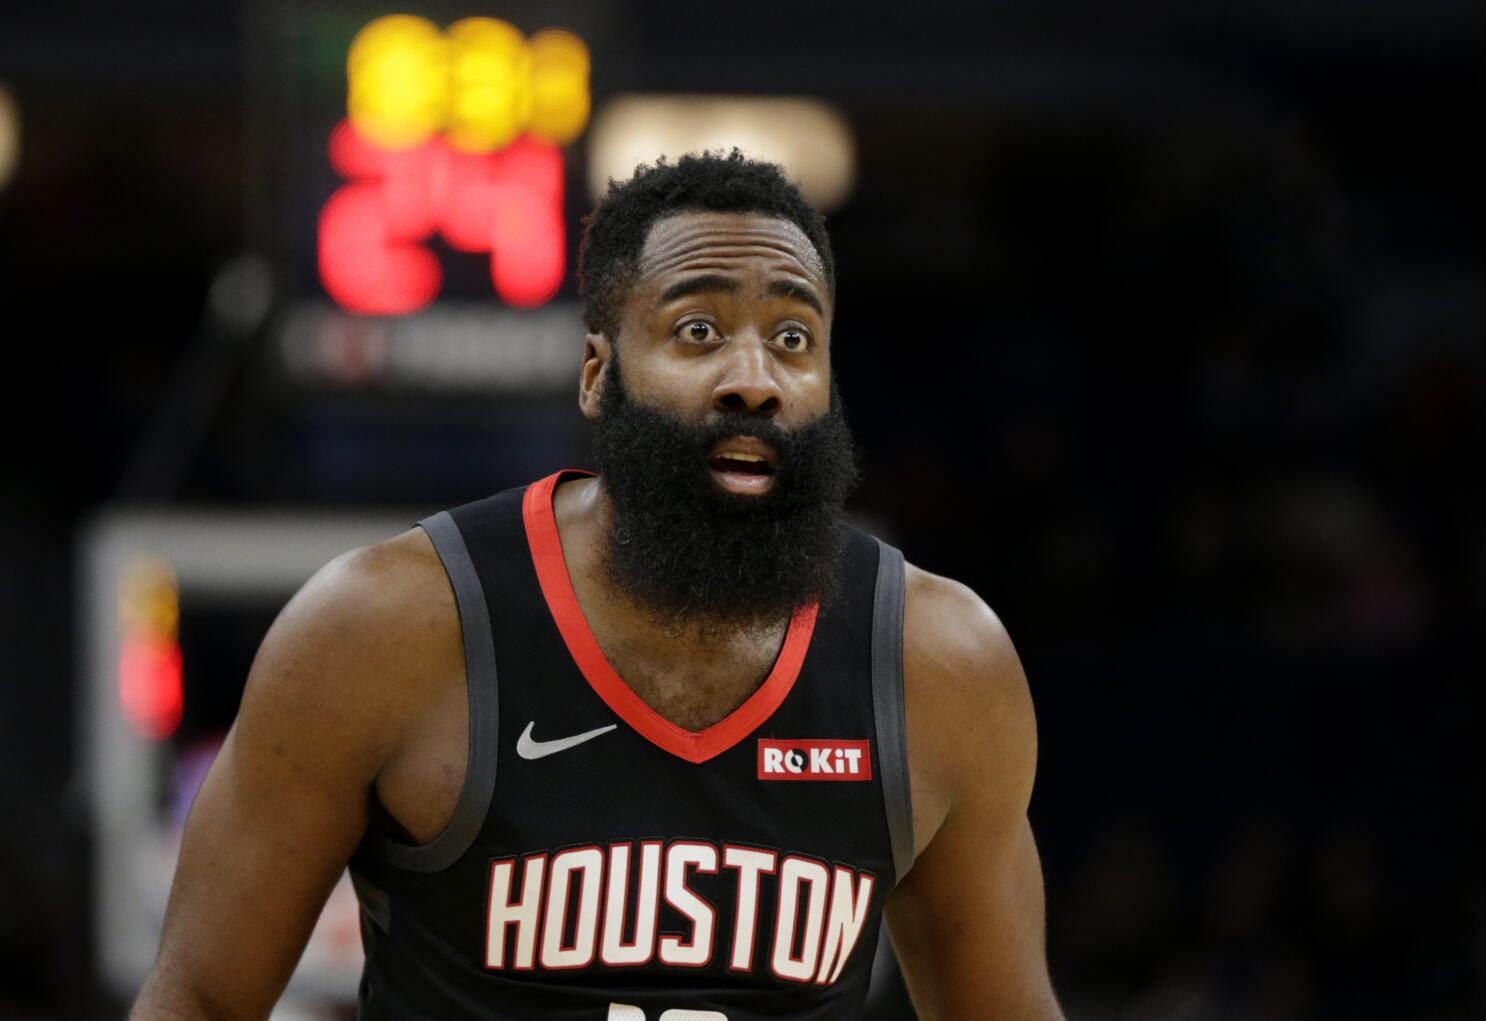 Harden shines in Philly home debut with 26 points vs Knicks